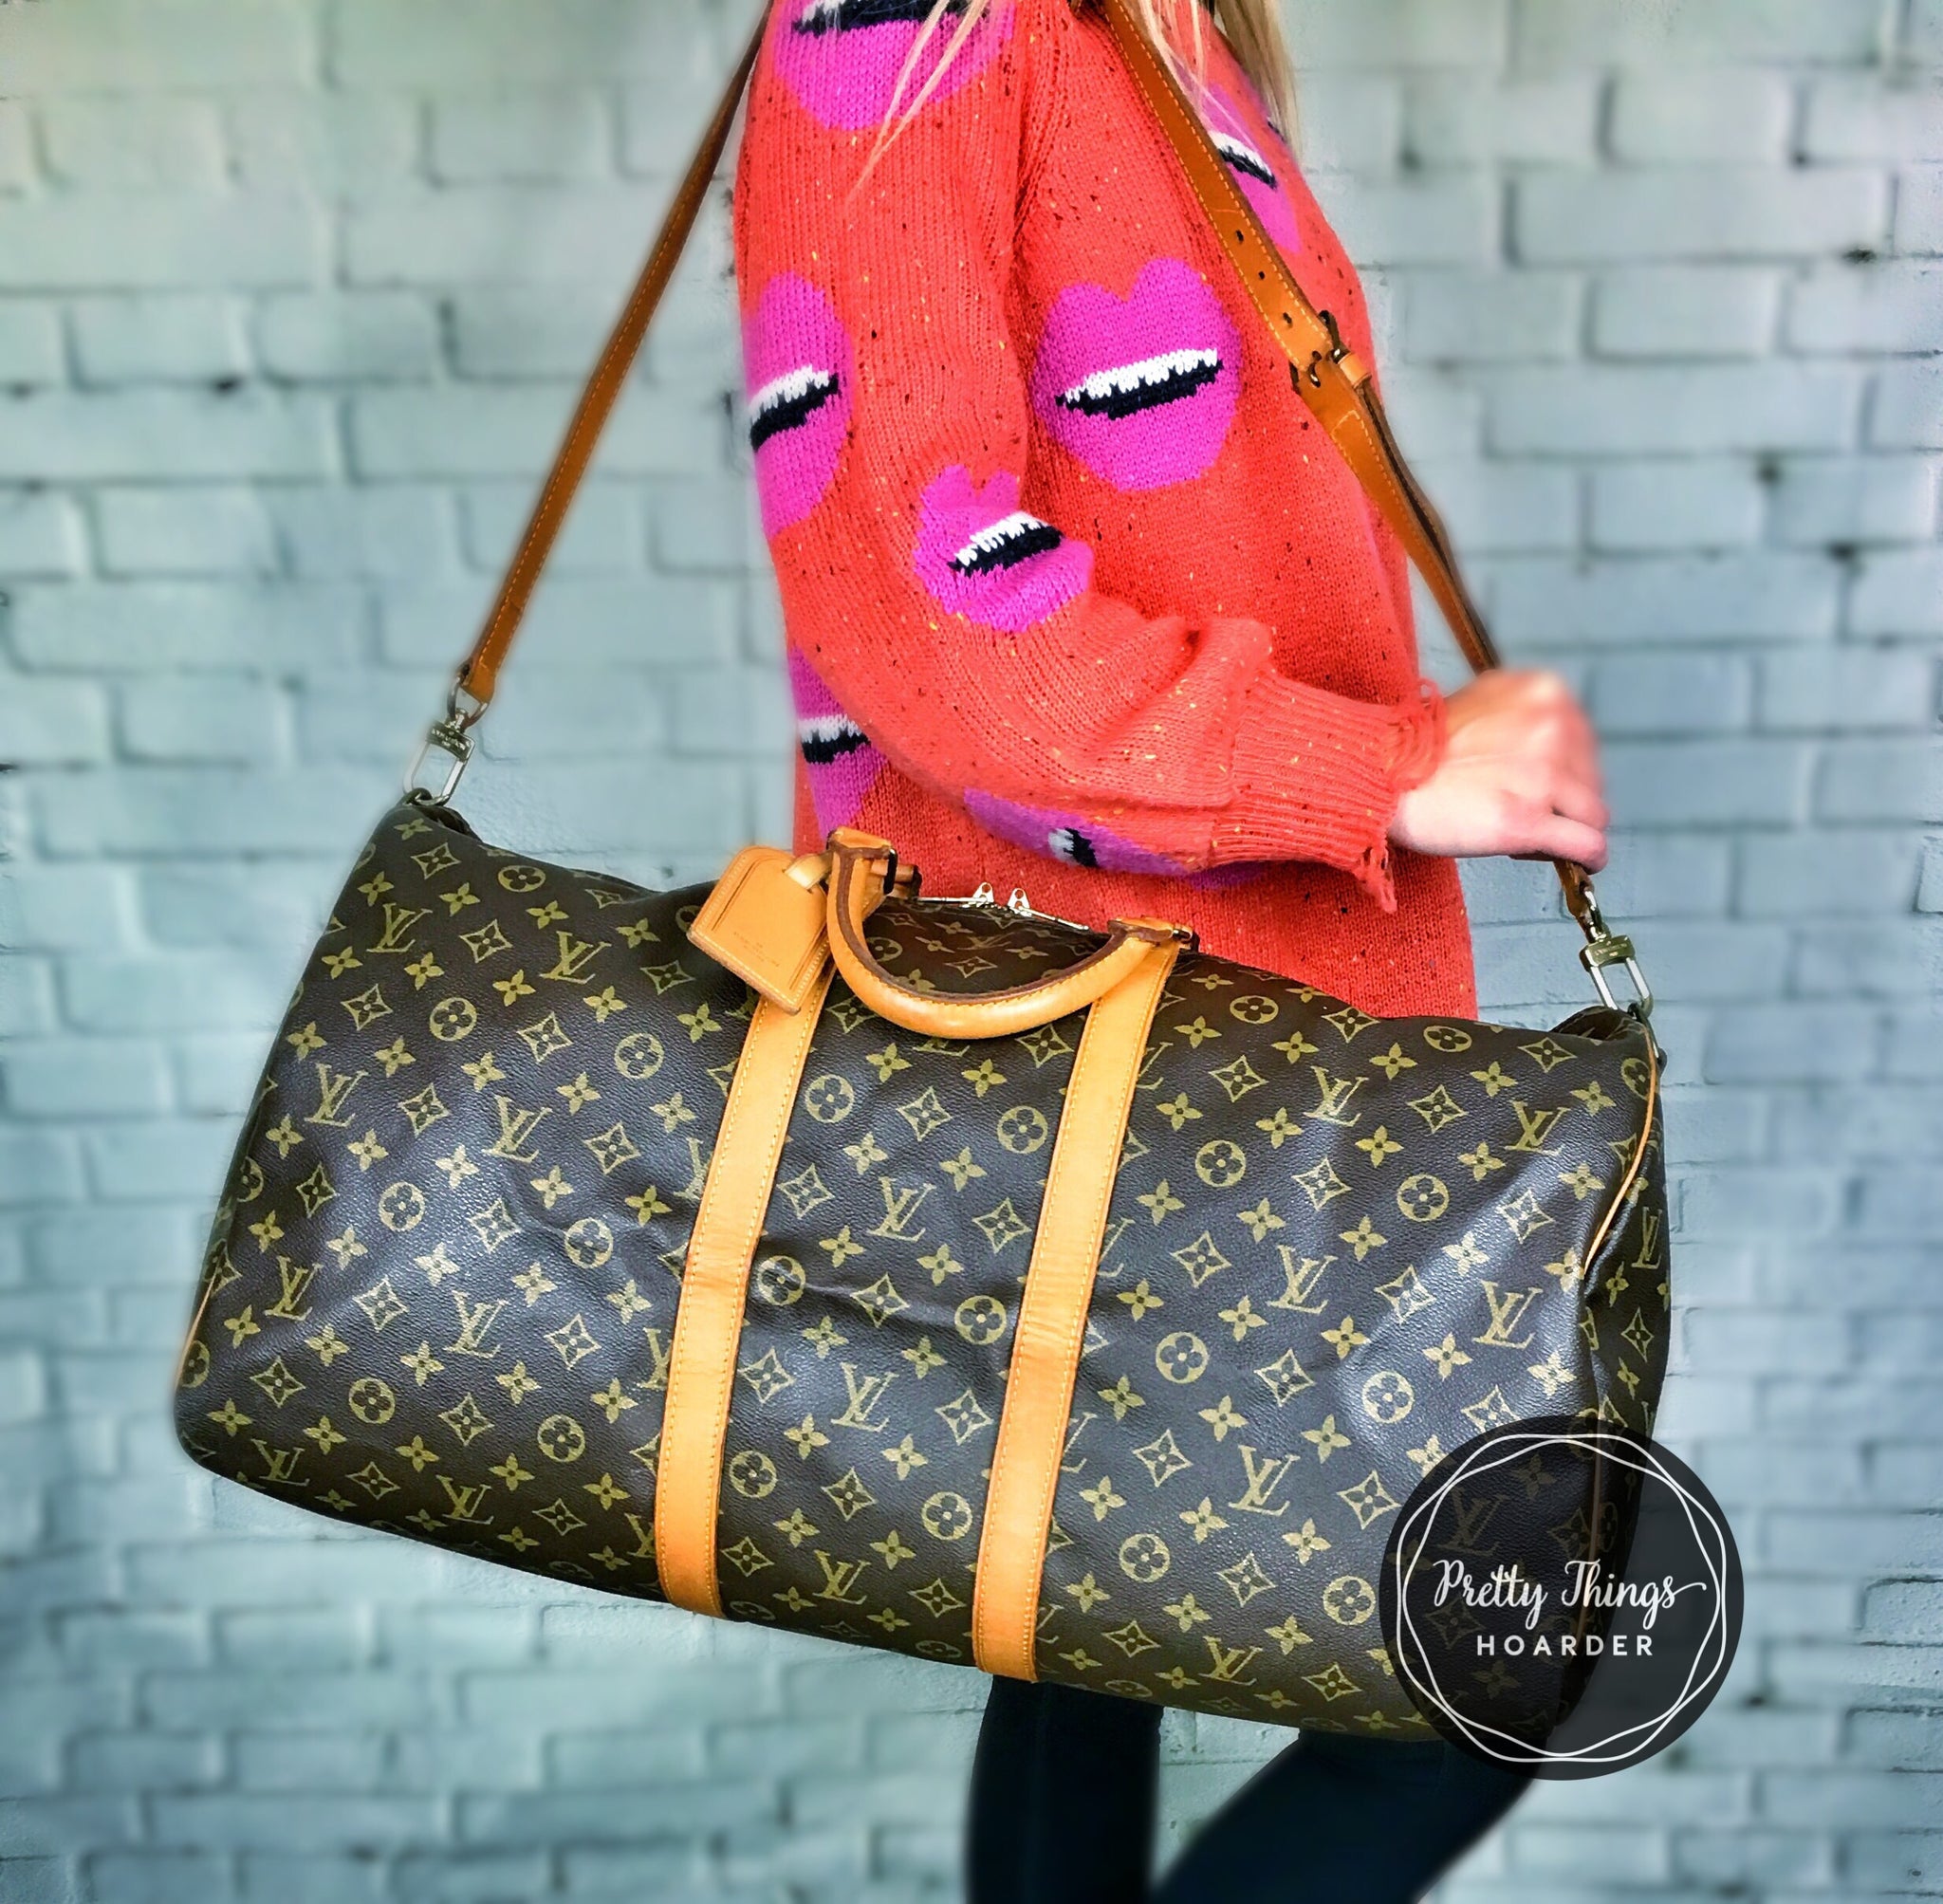 diakritisk tag på sightseeing tang LOUIS VUITTON Keepall 55 Bandouliere Duffel Bag – Pretty Things Hoarder